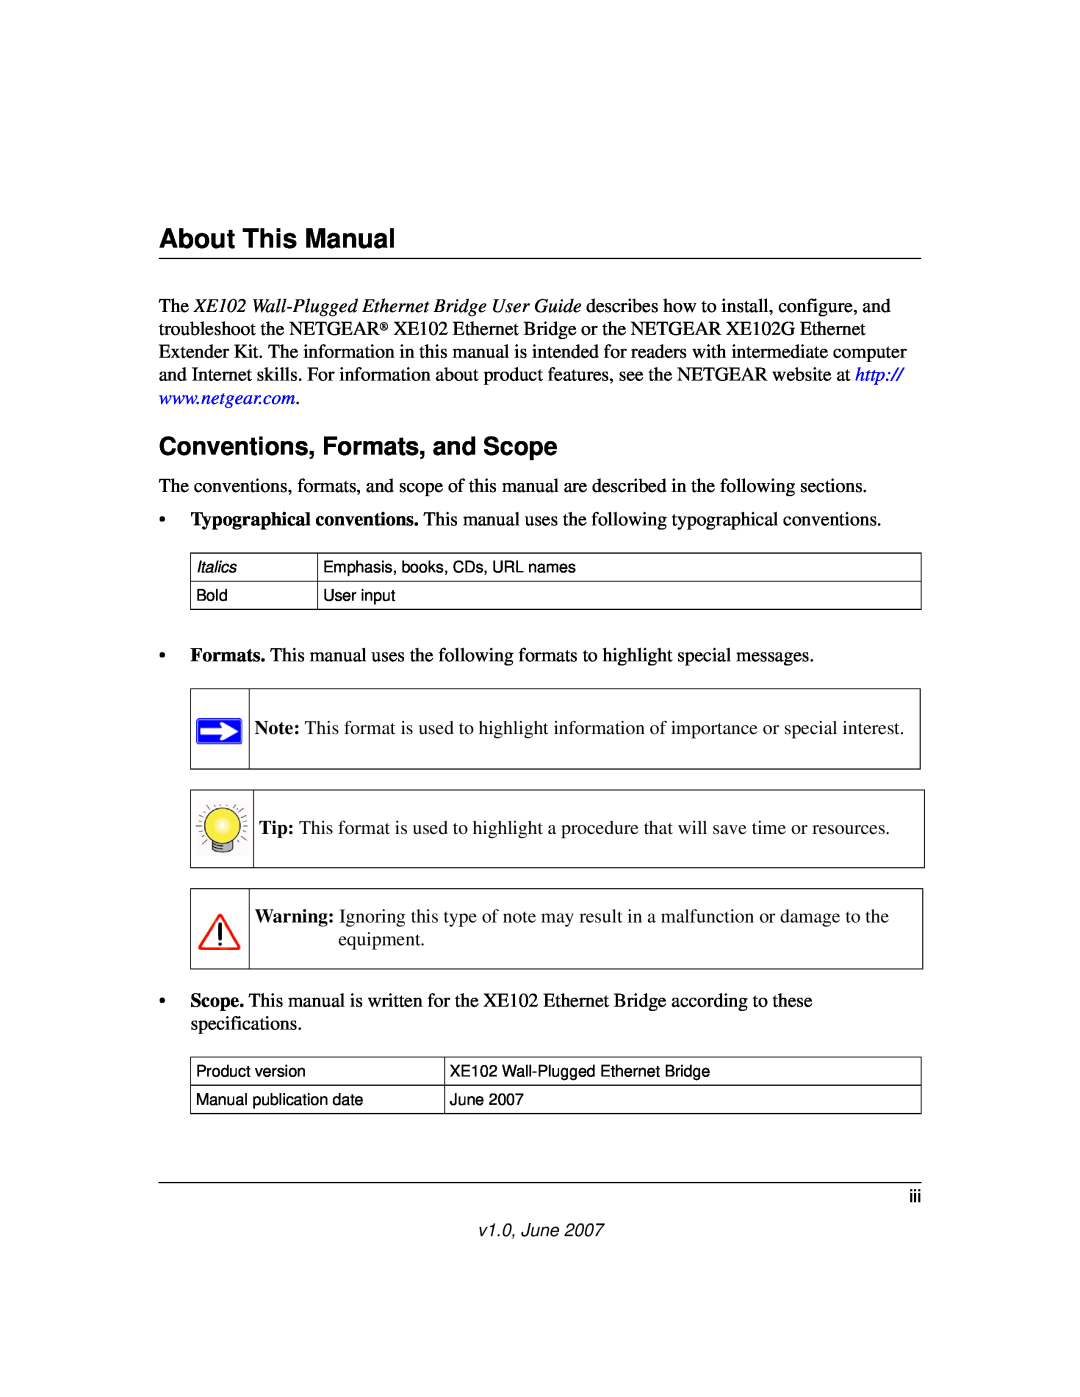 NETGEAR XE102 manual About This Manual, Conventions, Formats, and Scope 